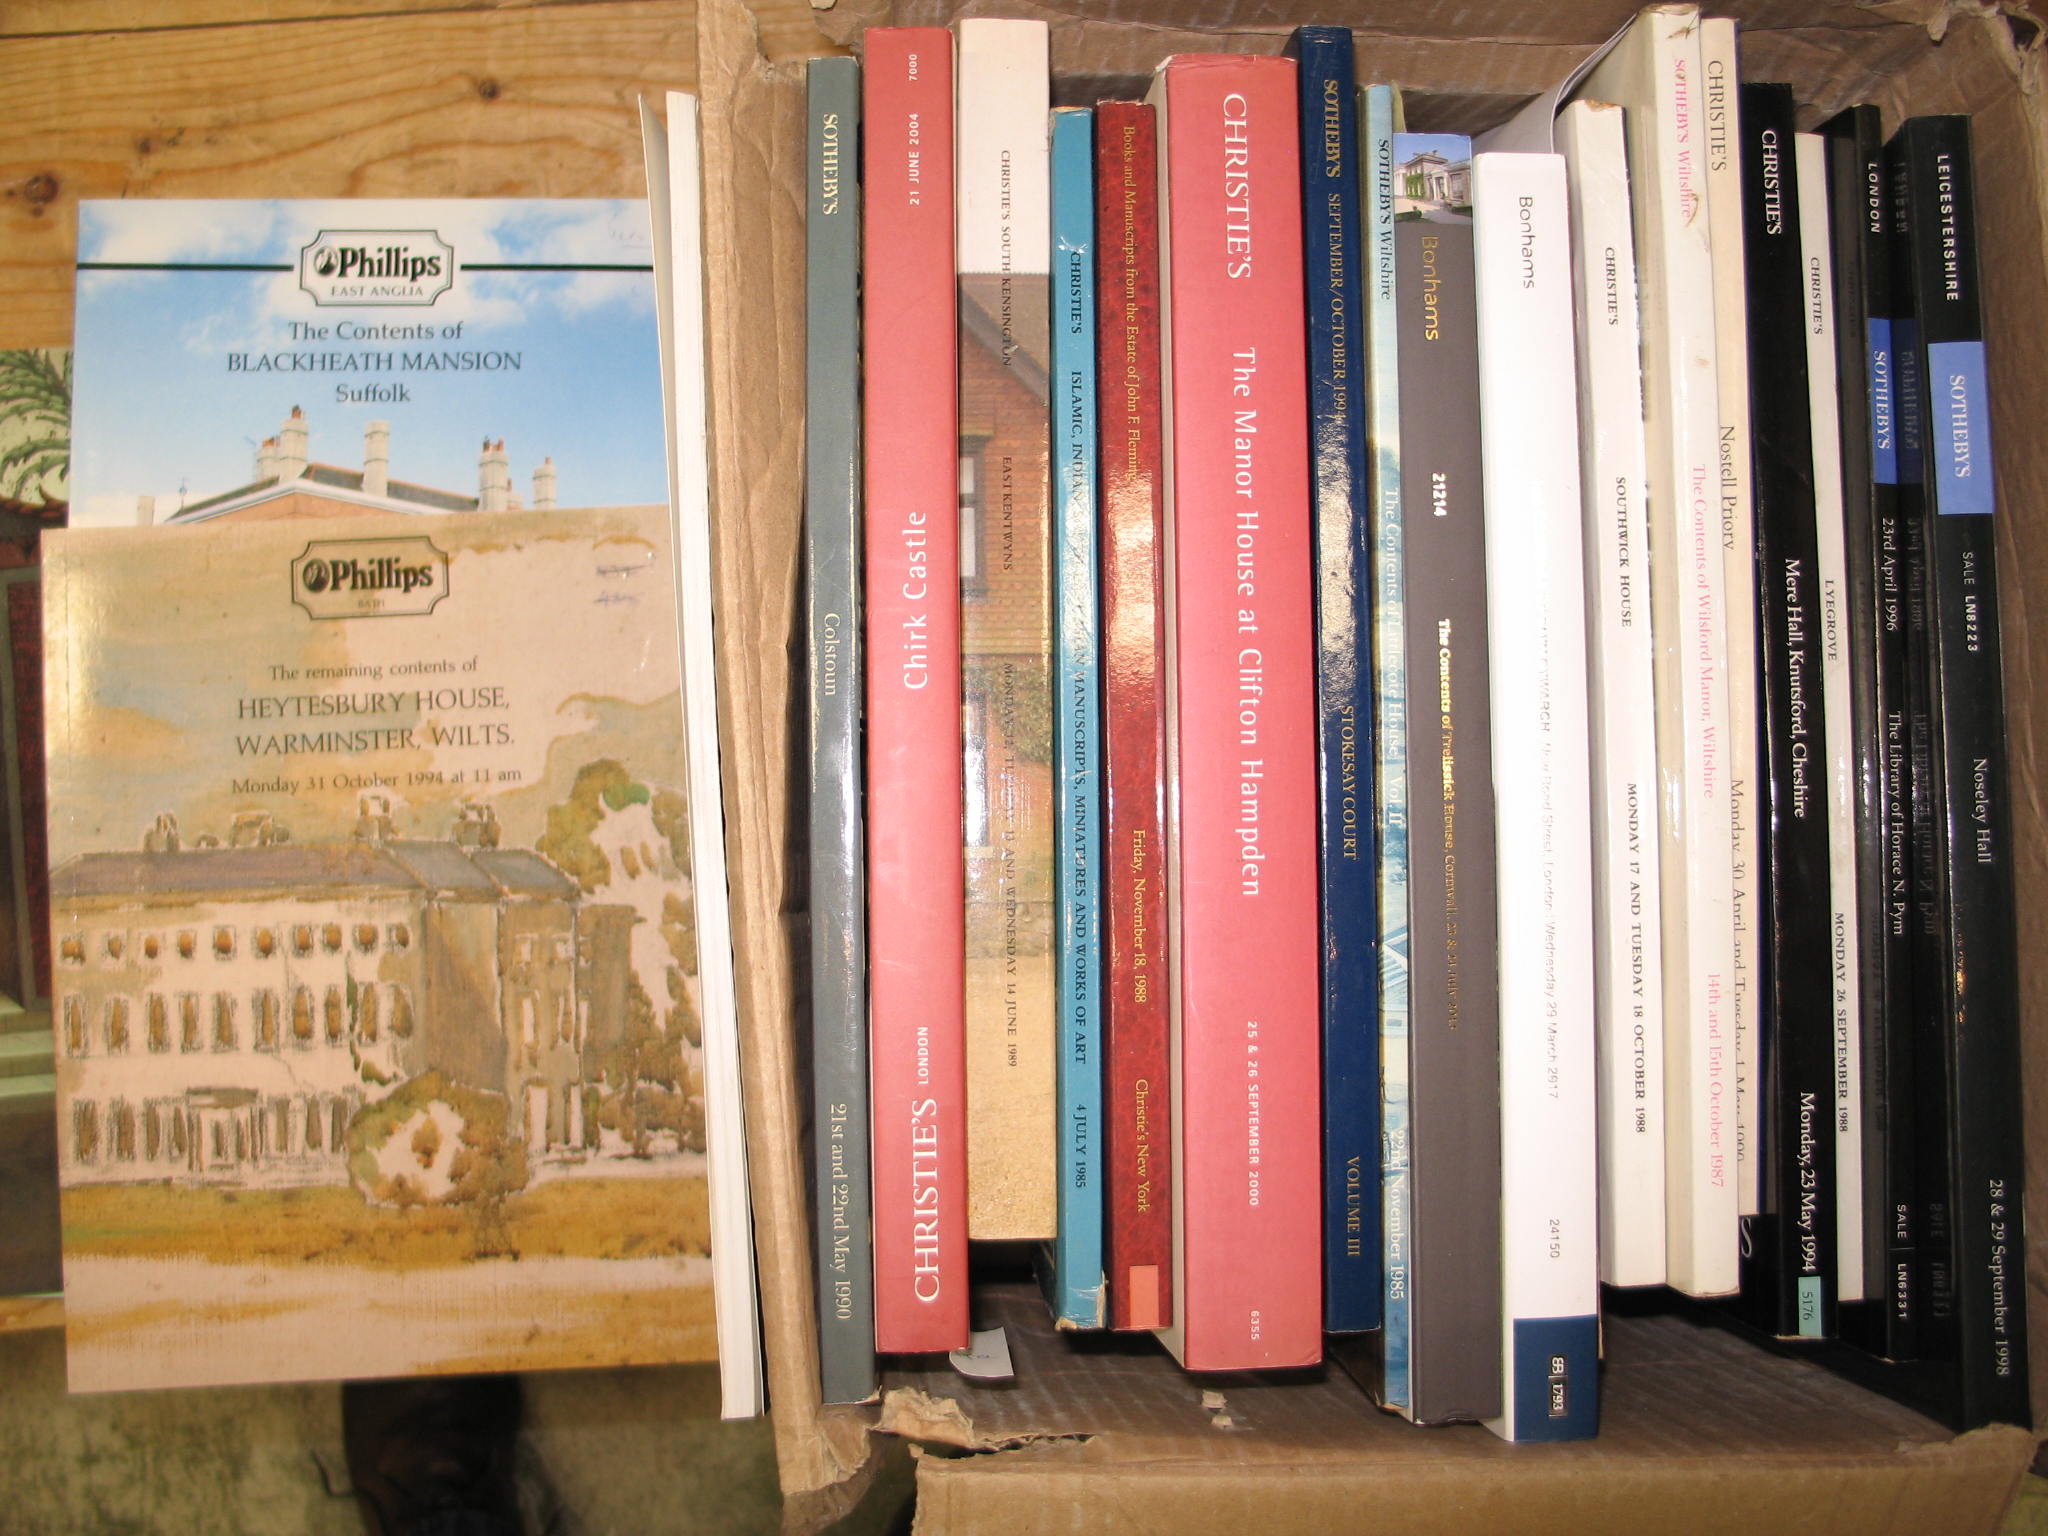 COUNTRY HOUSE AUCTION CATALOGUES, some ms. notes etc., i.e. used, some price lists. (1 box).